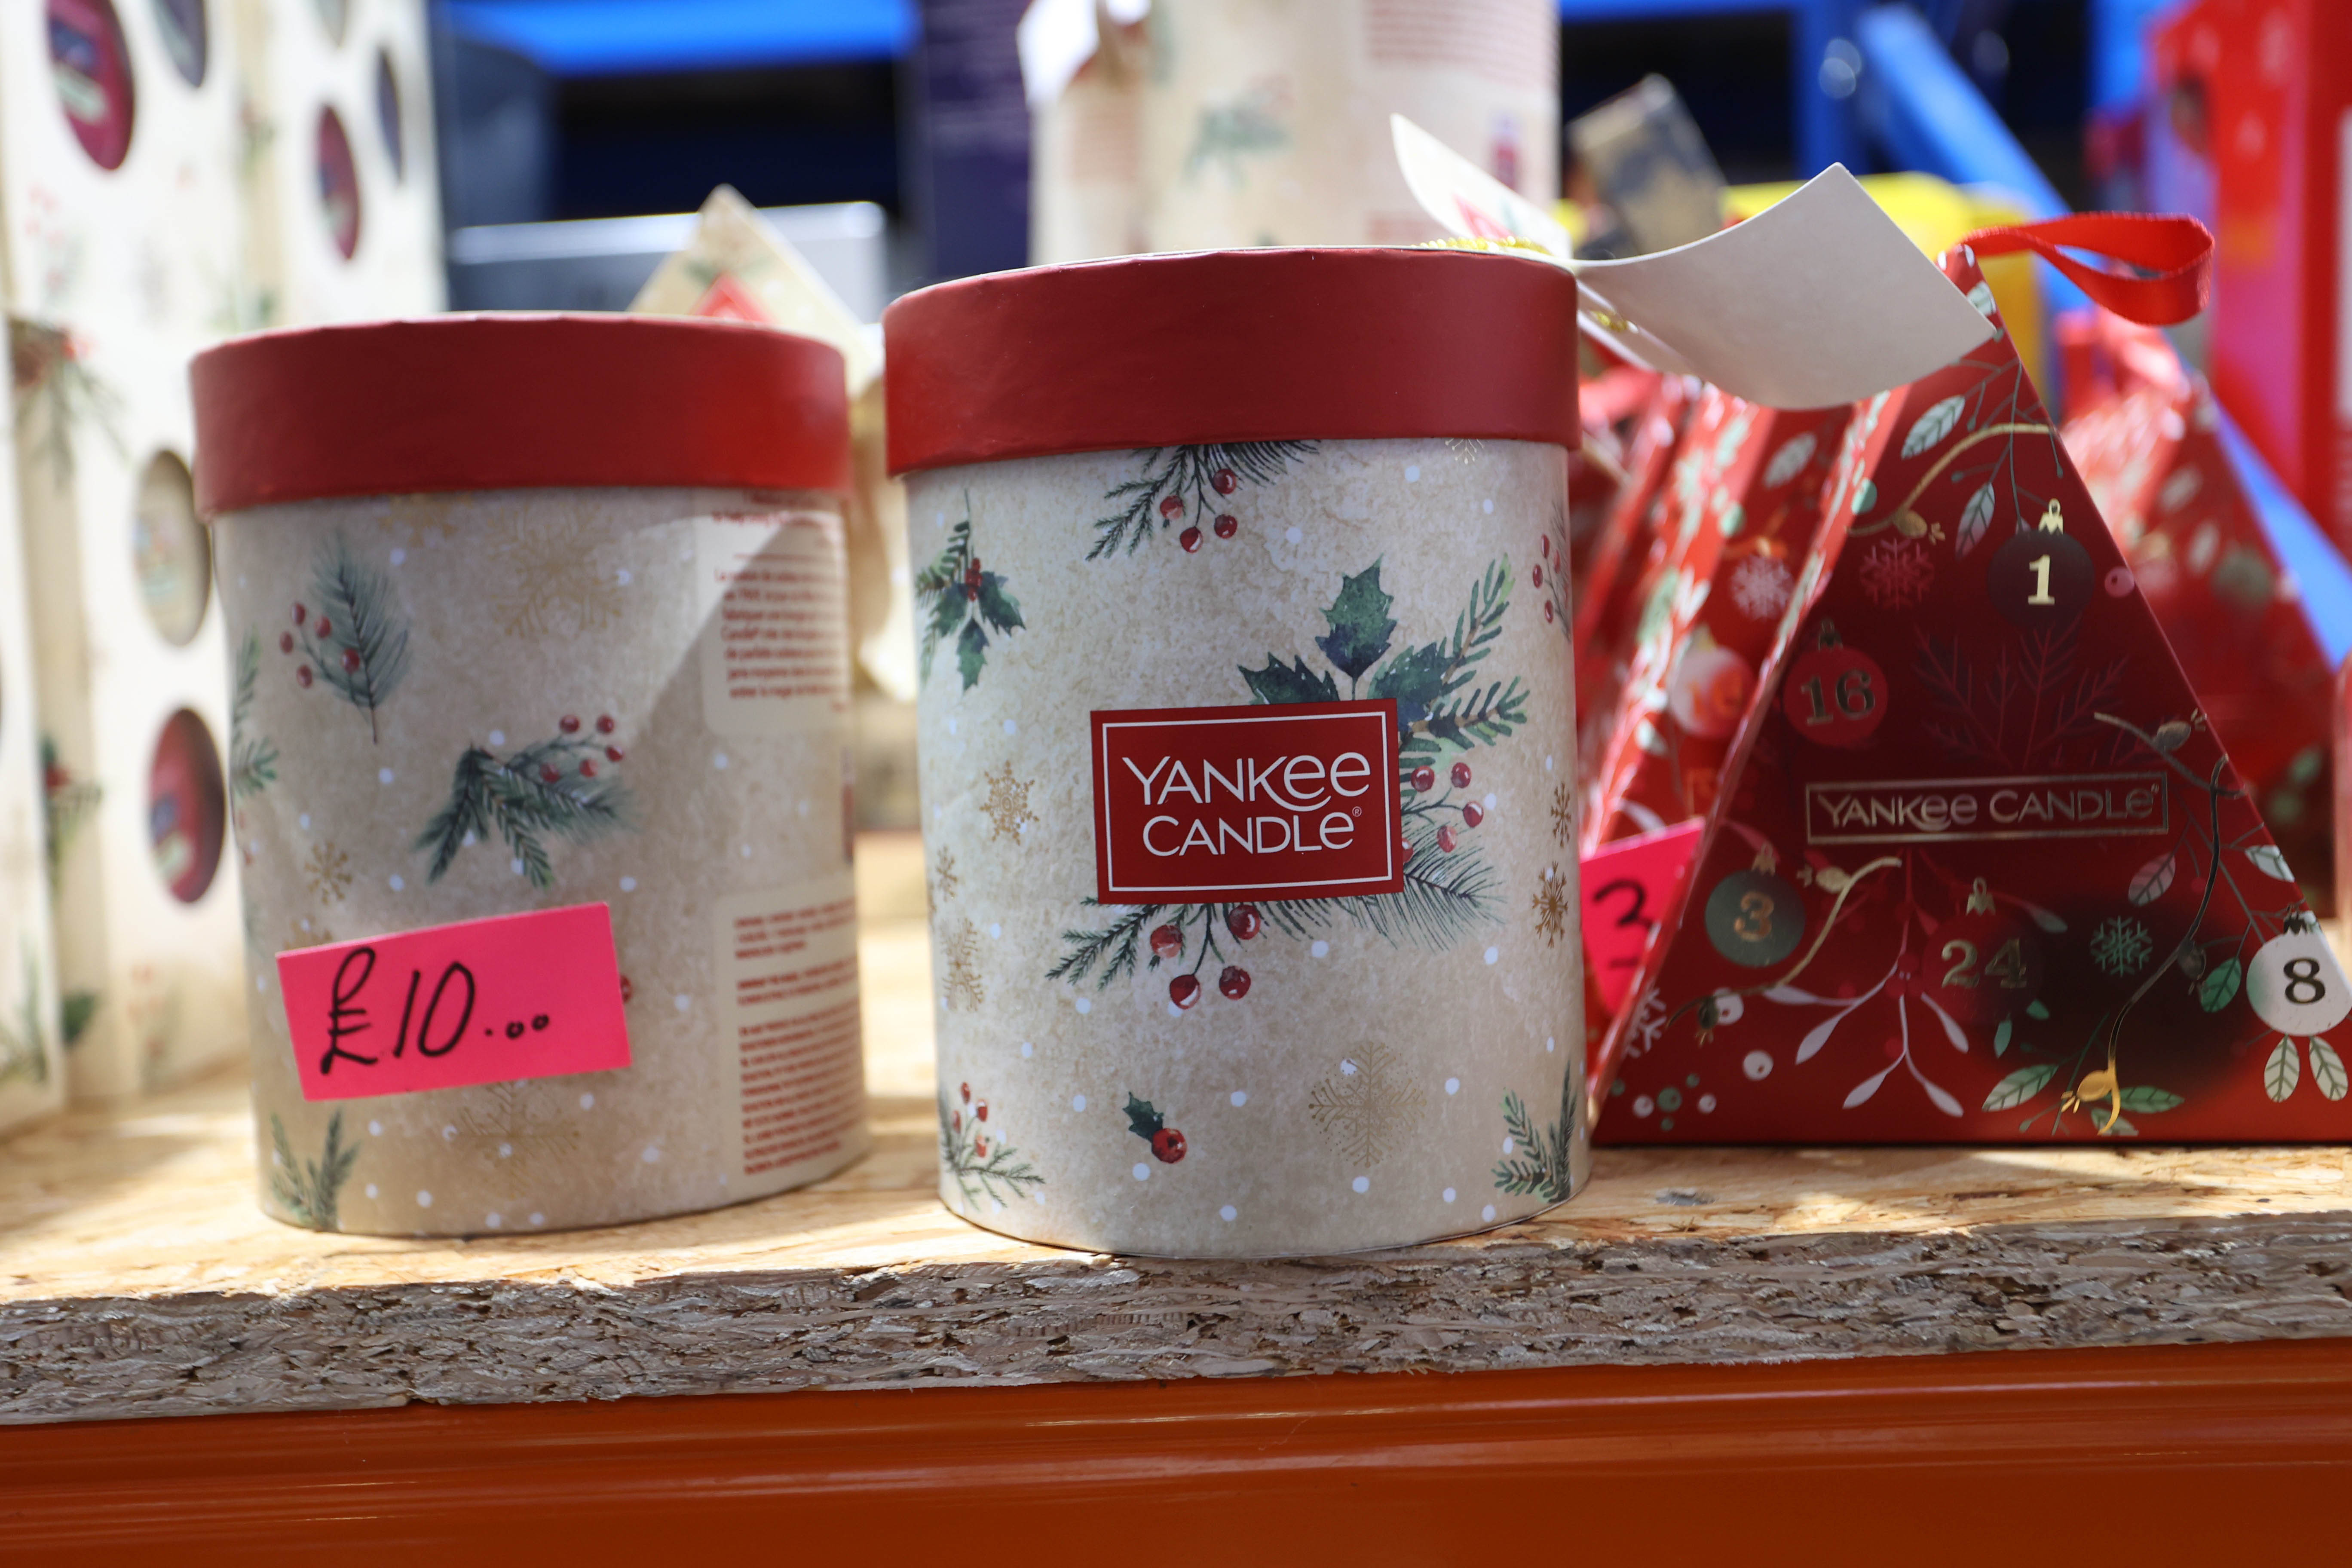 There are Yankee Candle Gift sets for just £10 - cheaper than the £18.99 original